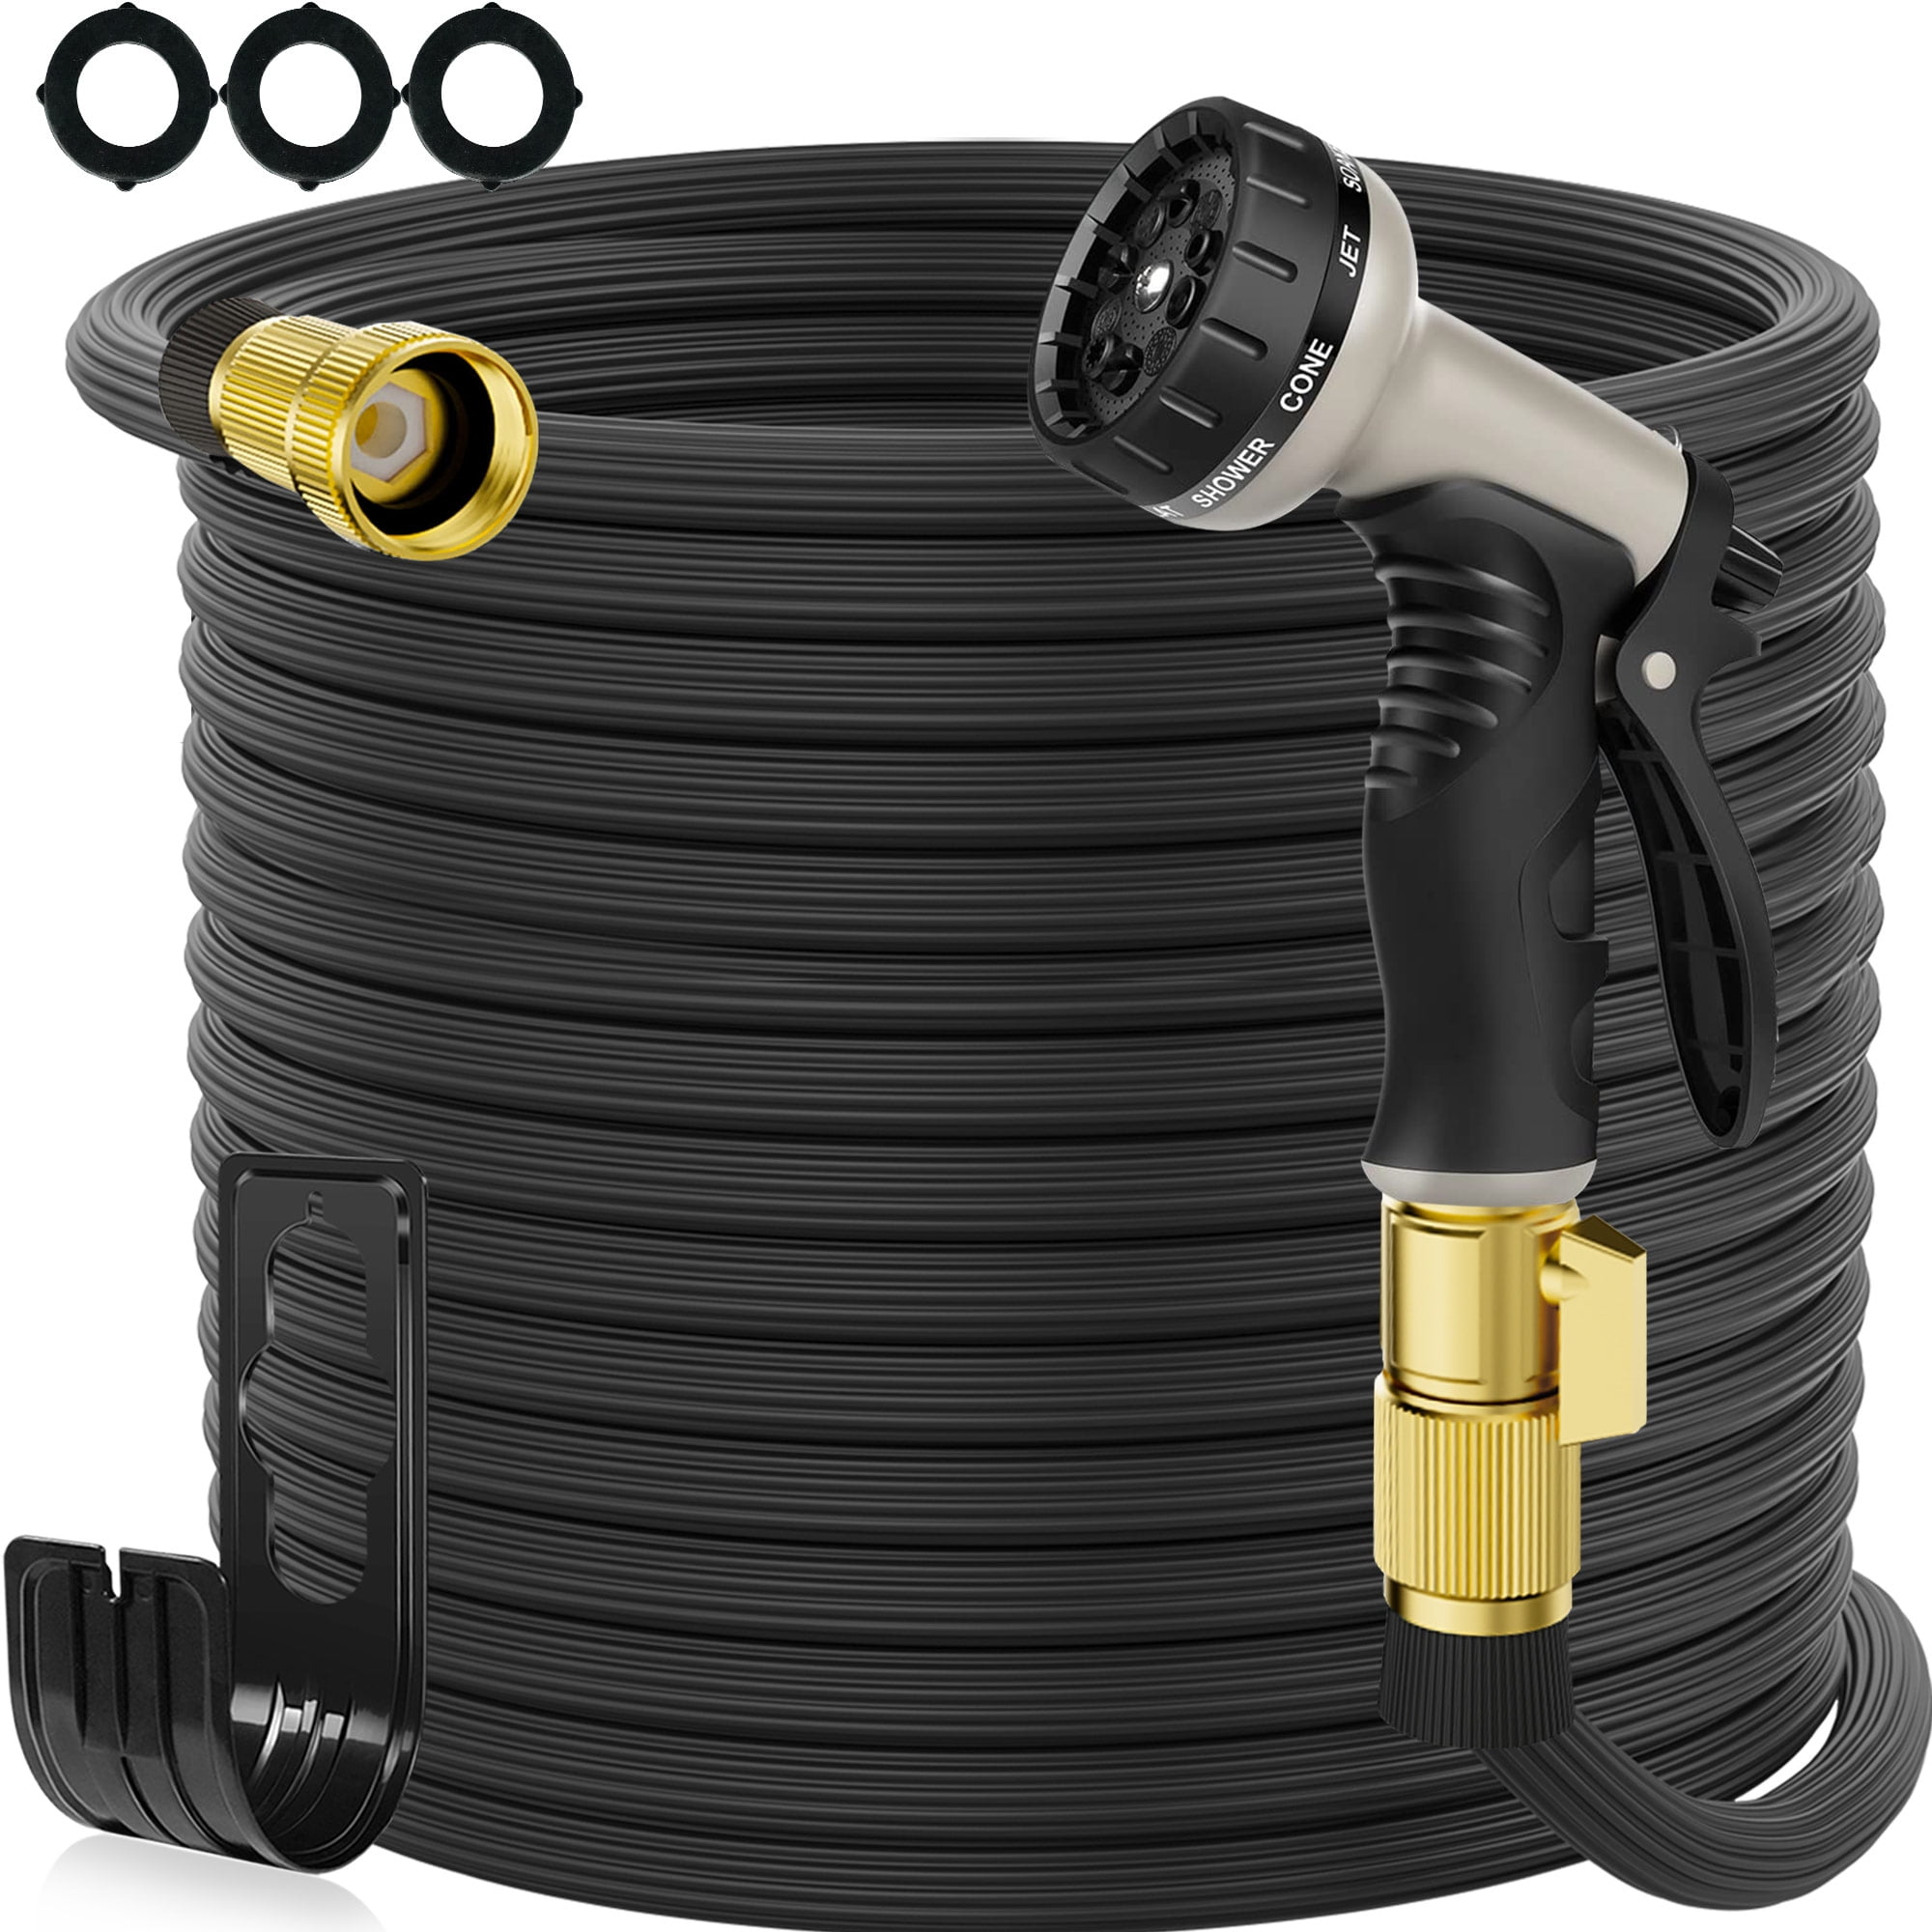 75FT Garden Hose Water Hose, Best Choice for Watering and Washing 